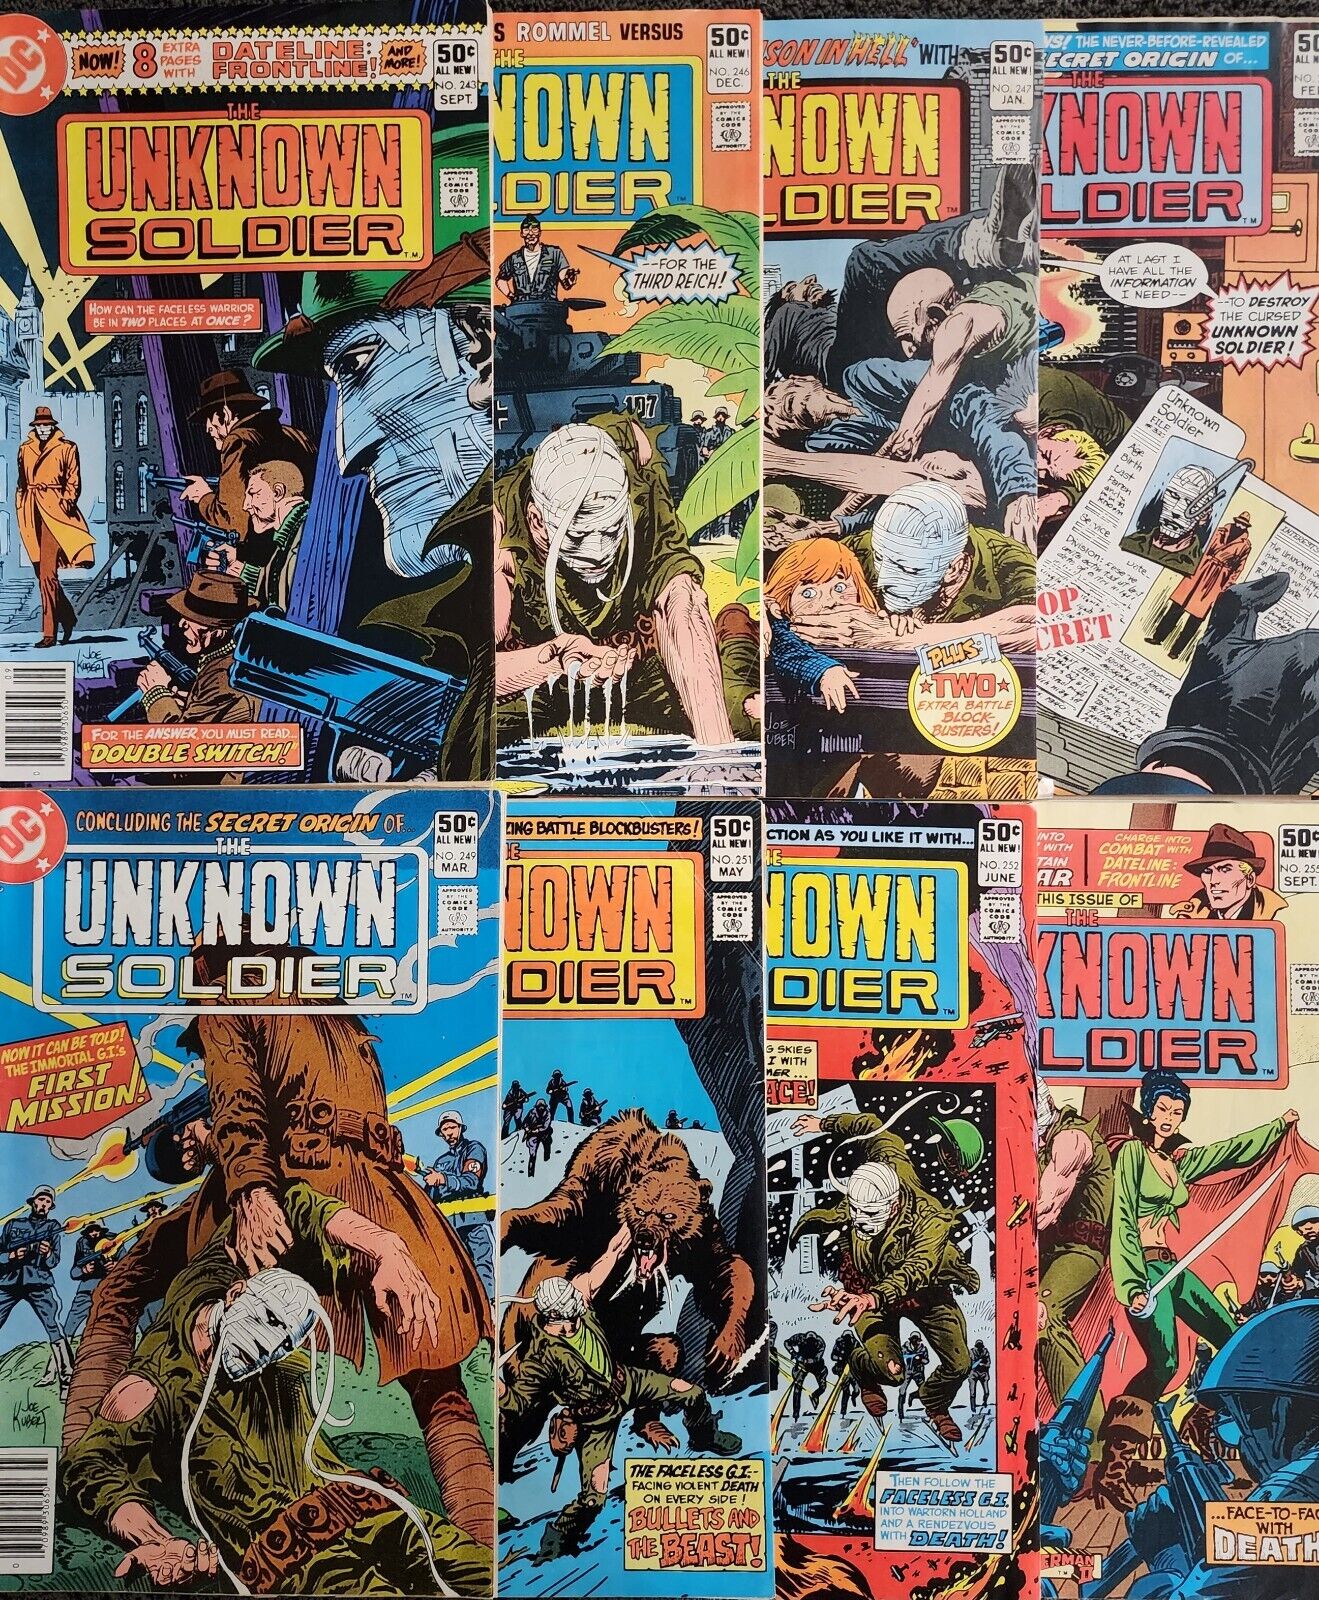 The Unknown Soldier Vol. 29 Issue 243, 246-249, 251, 252, 255 DC Comic Book Lot 